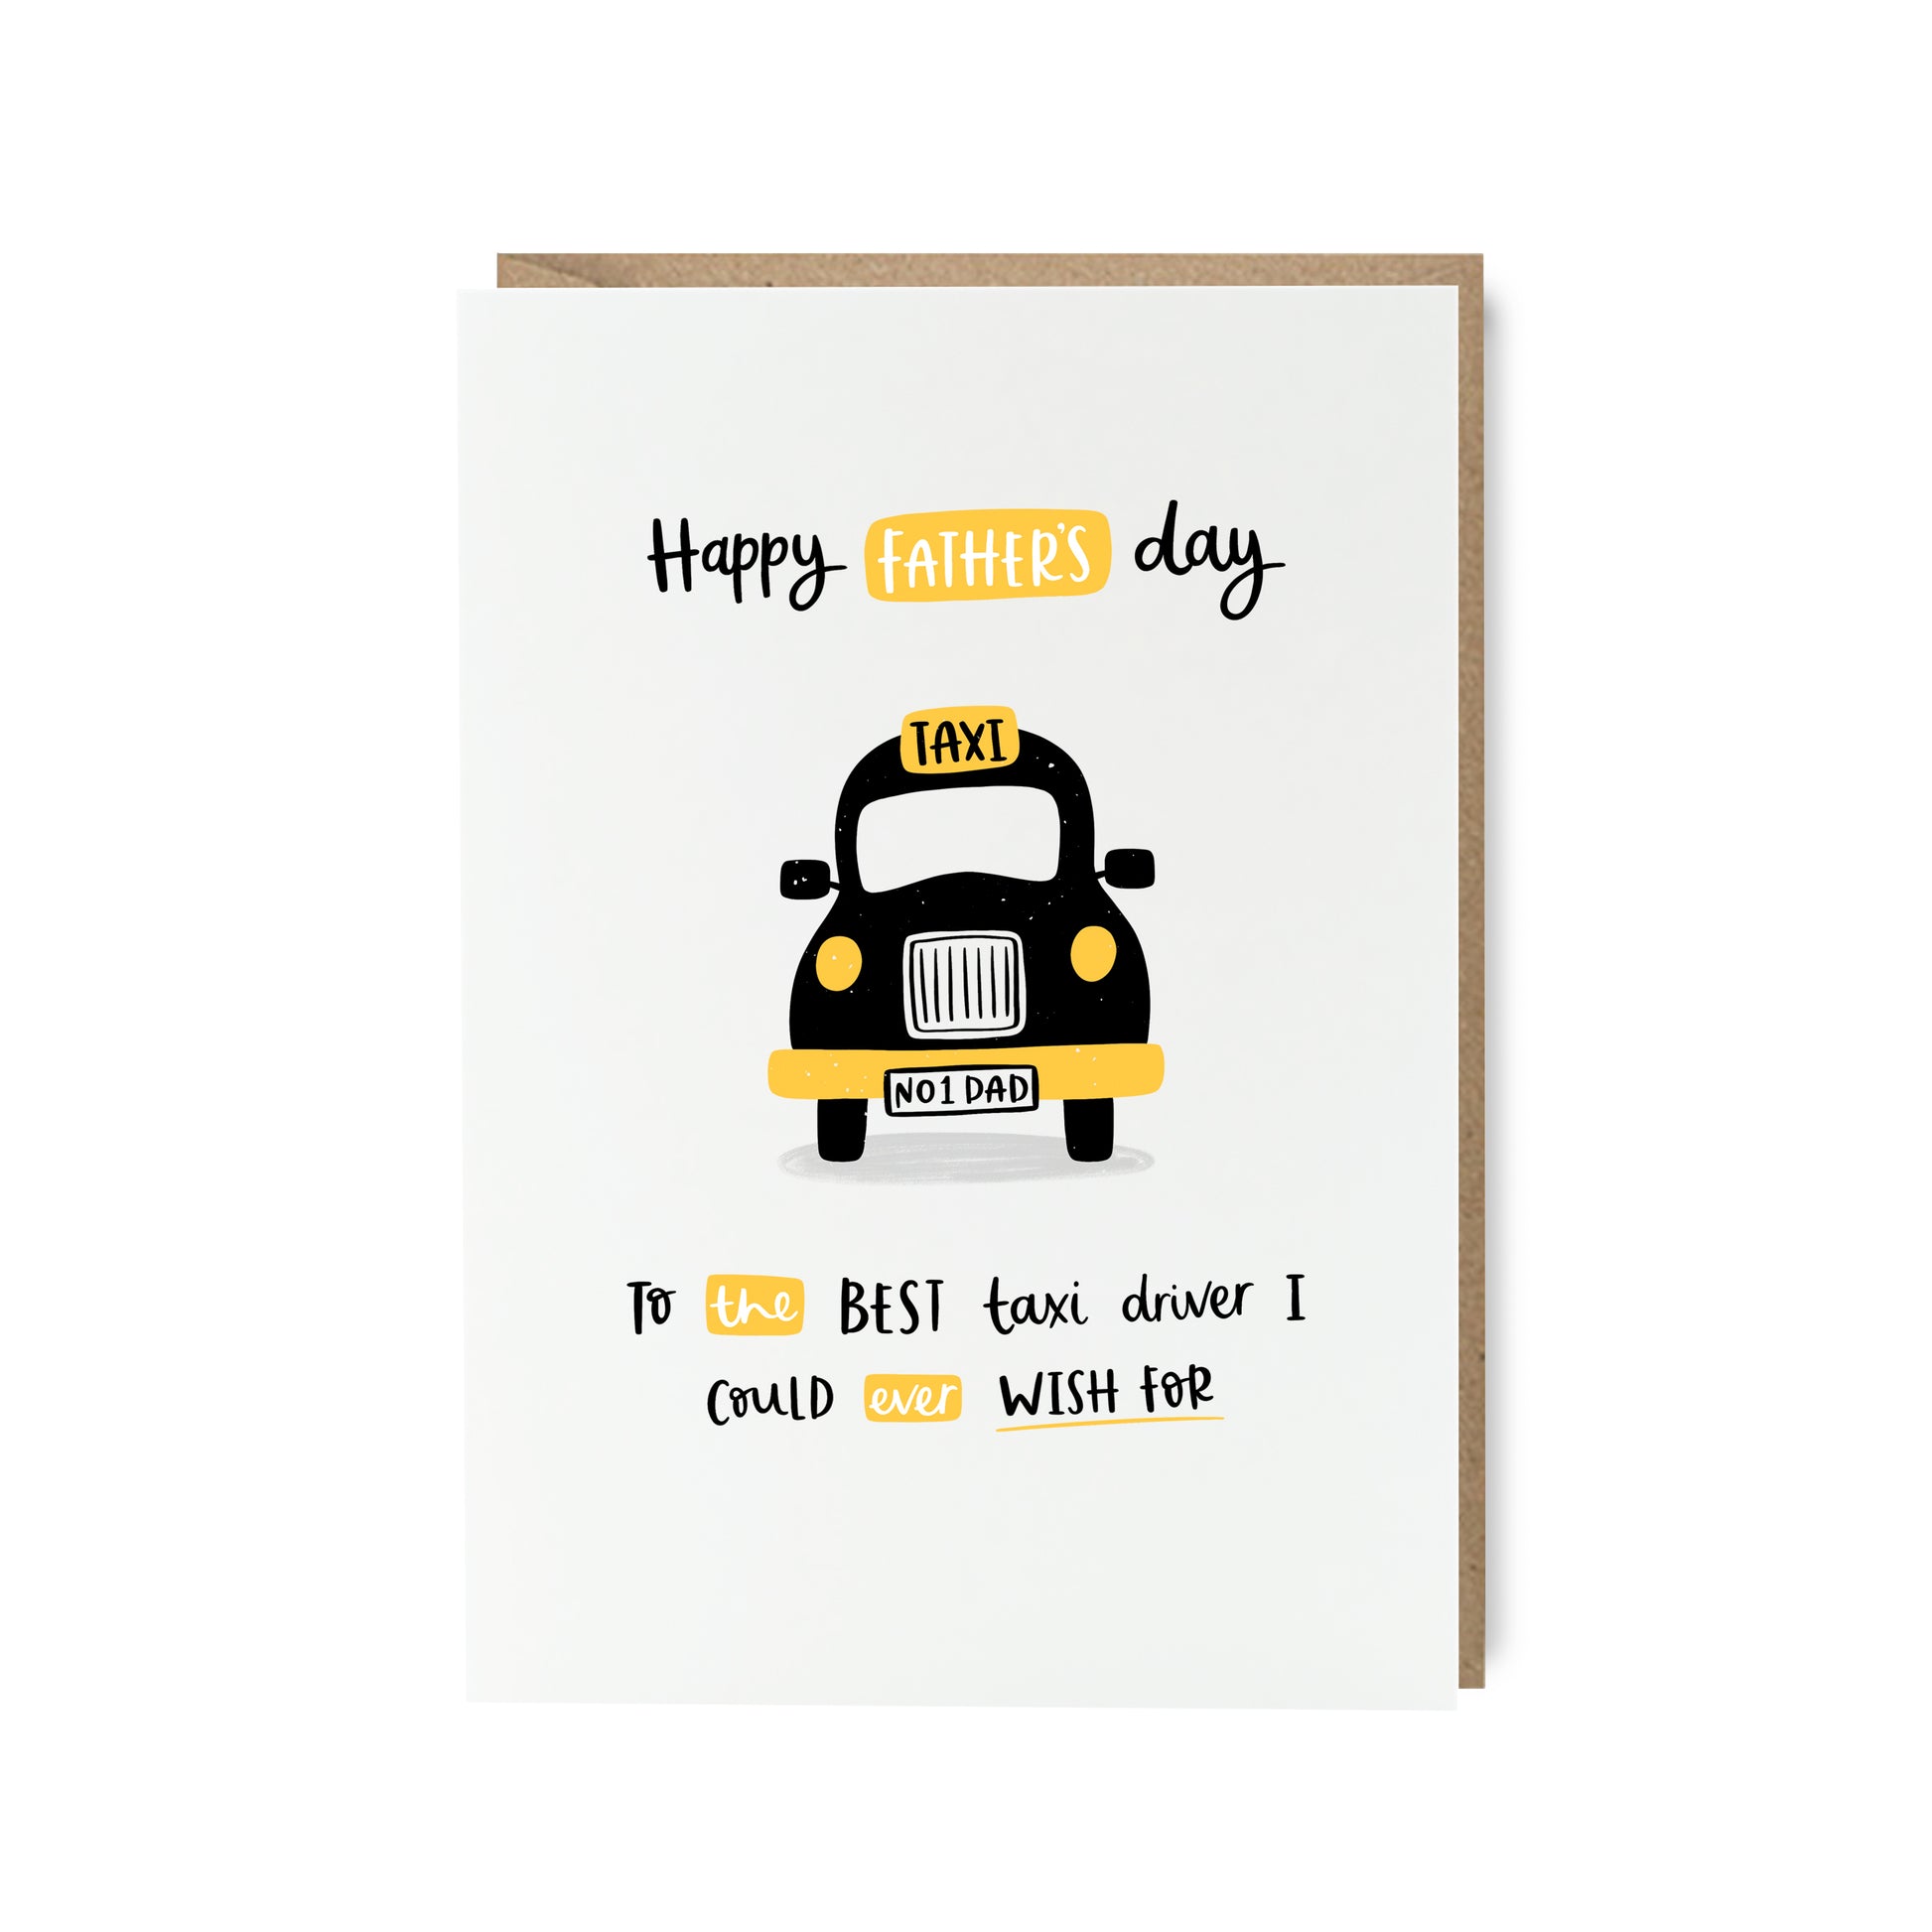 Best taxi driver funny father's day card by Abbie Imagine